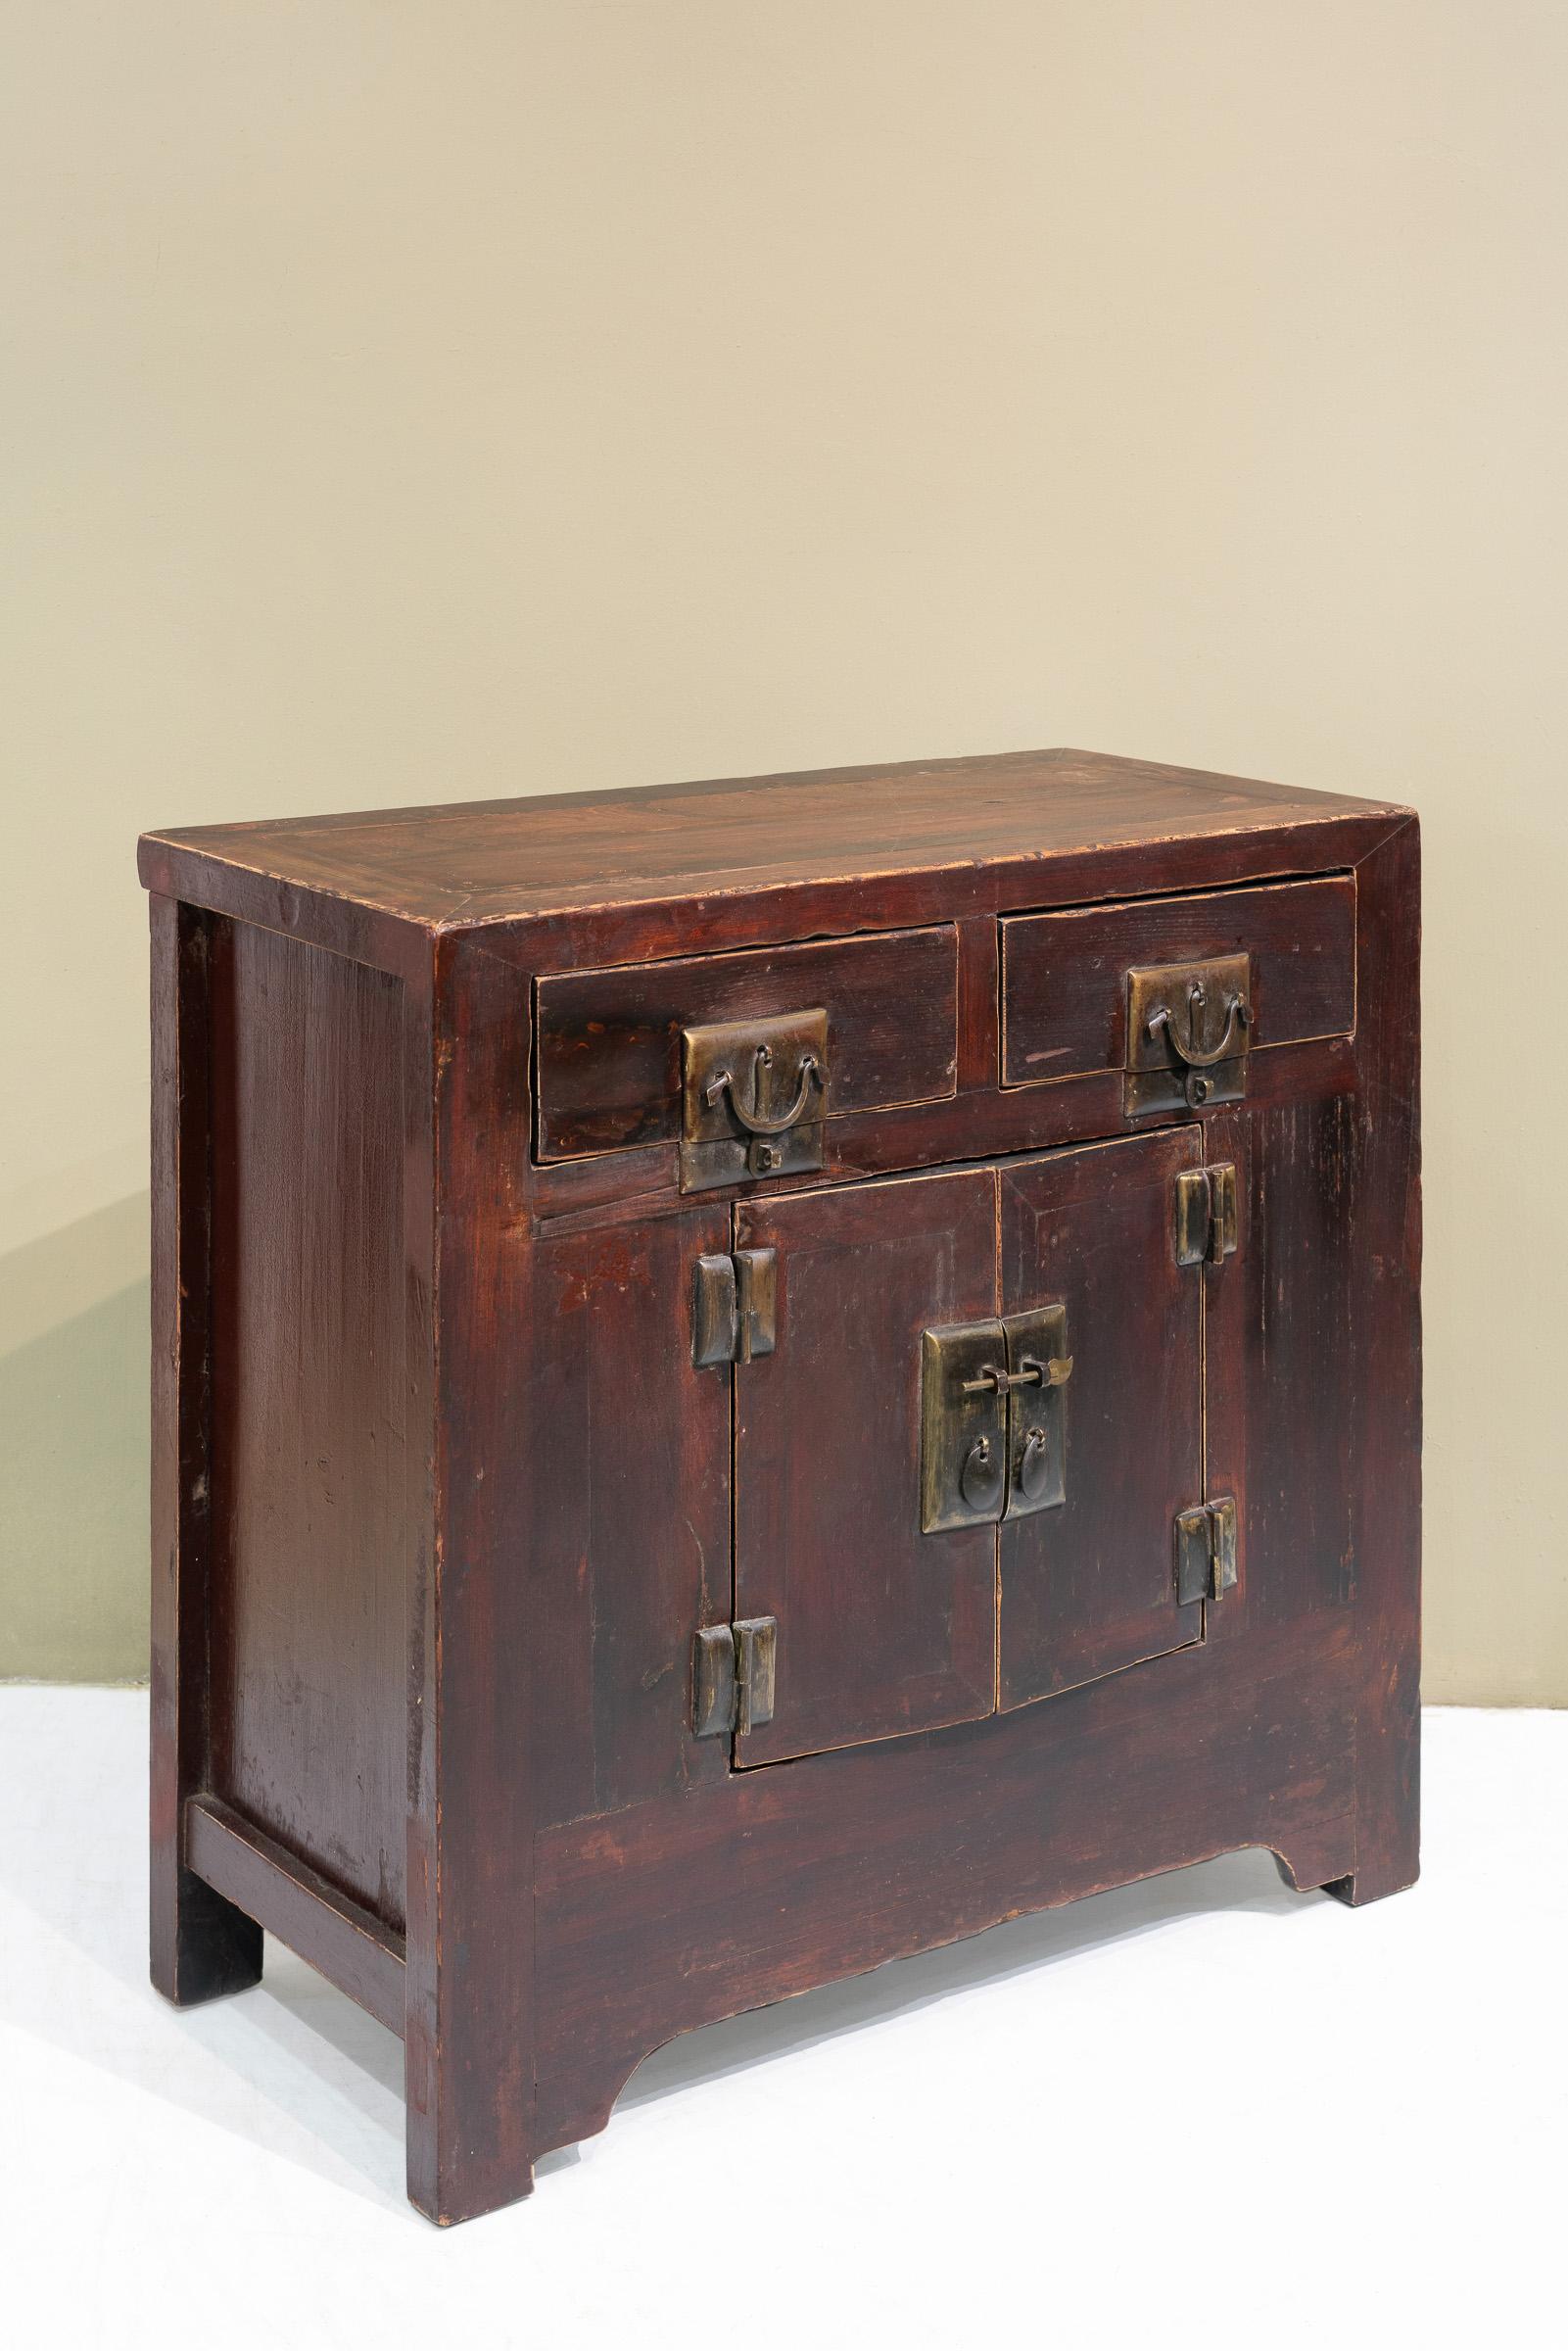 A medium sized late 19th cabinet from Shanxi province, China, that is made of Elm and Pine woods. The bulging brass handles are original, and this handle design is a distinct trait of this type of cabinet. The long metal piece in the middle of the